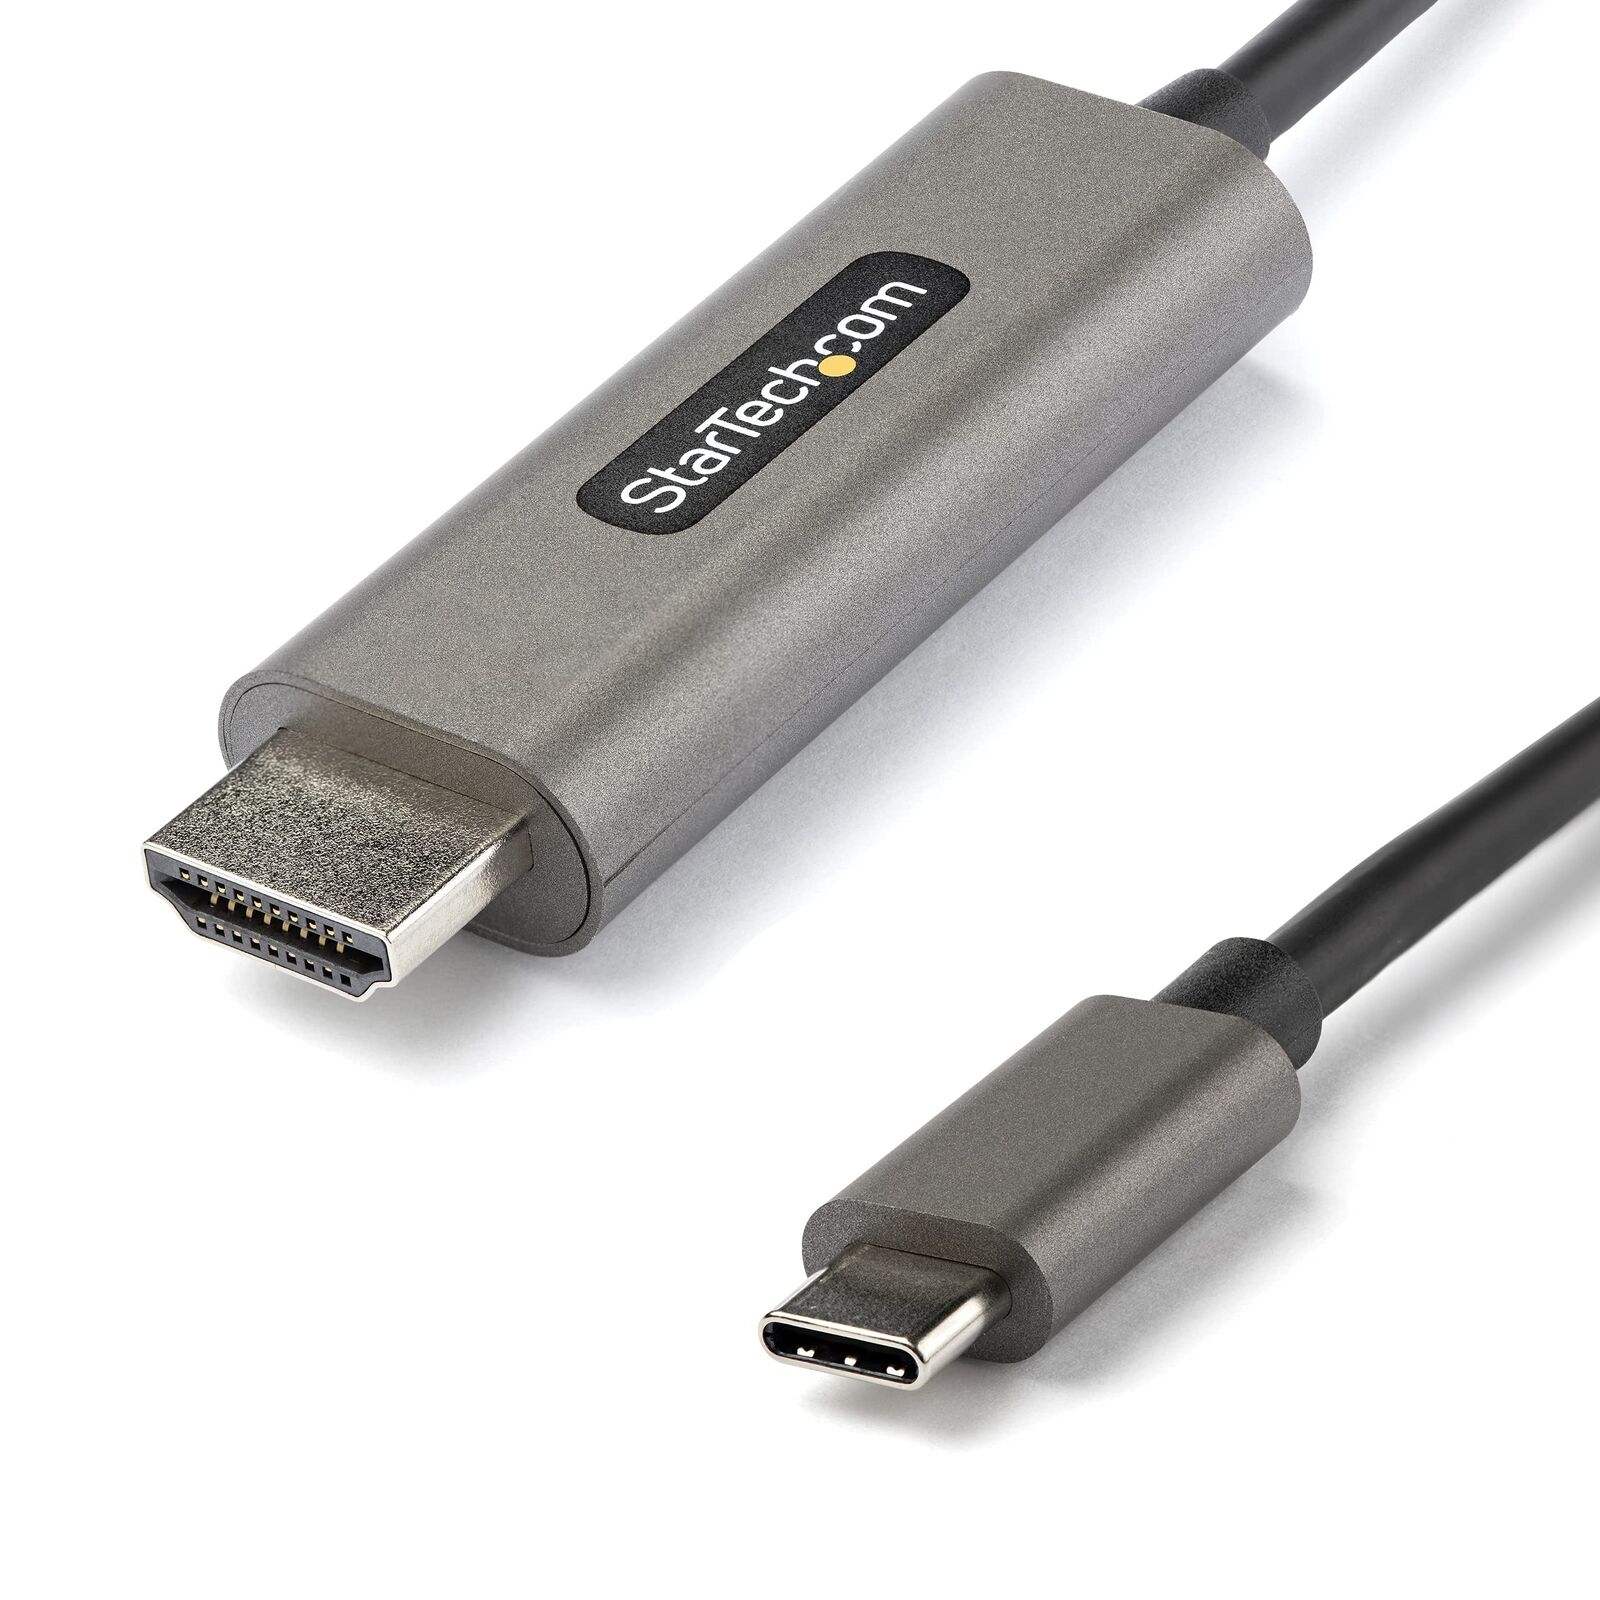 StarTech.com 13FT USB C TO HDMI CABLE 4K 60 WITH HDR10 - USB-C TO HDMI MONIT 13 